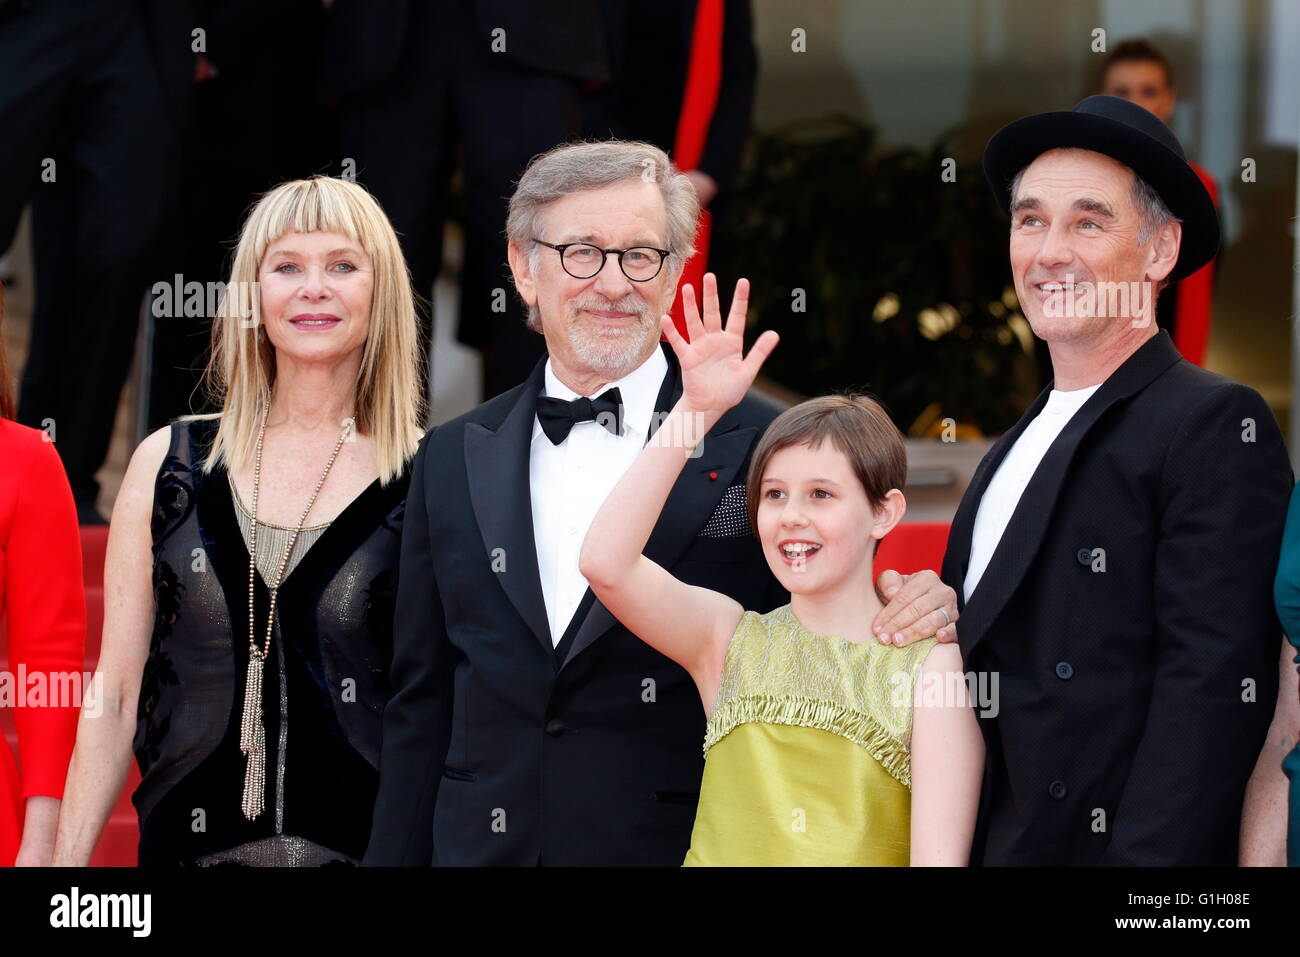 Actress Kate Capshaw (l-r), Steven Spielberg, actors Ruby Barnhill and Mark Rylance attend the premiere of 'The BFG' during the 69th Annual Cannes Film Festival at Palais des Festivals in Cannes, France, on 14 May 2016. Photo: Hubert Boesl Stock Photo